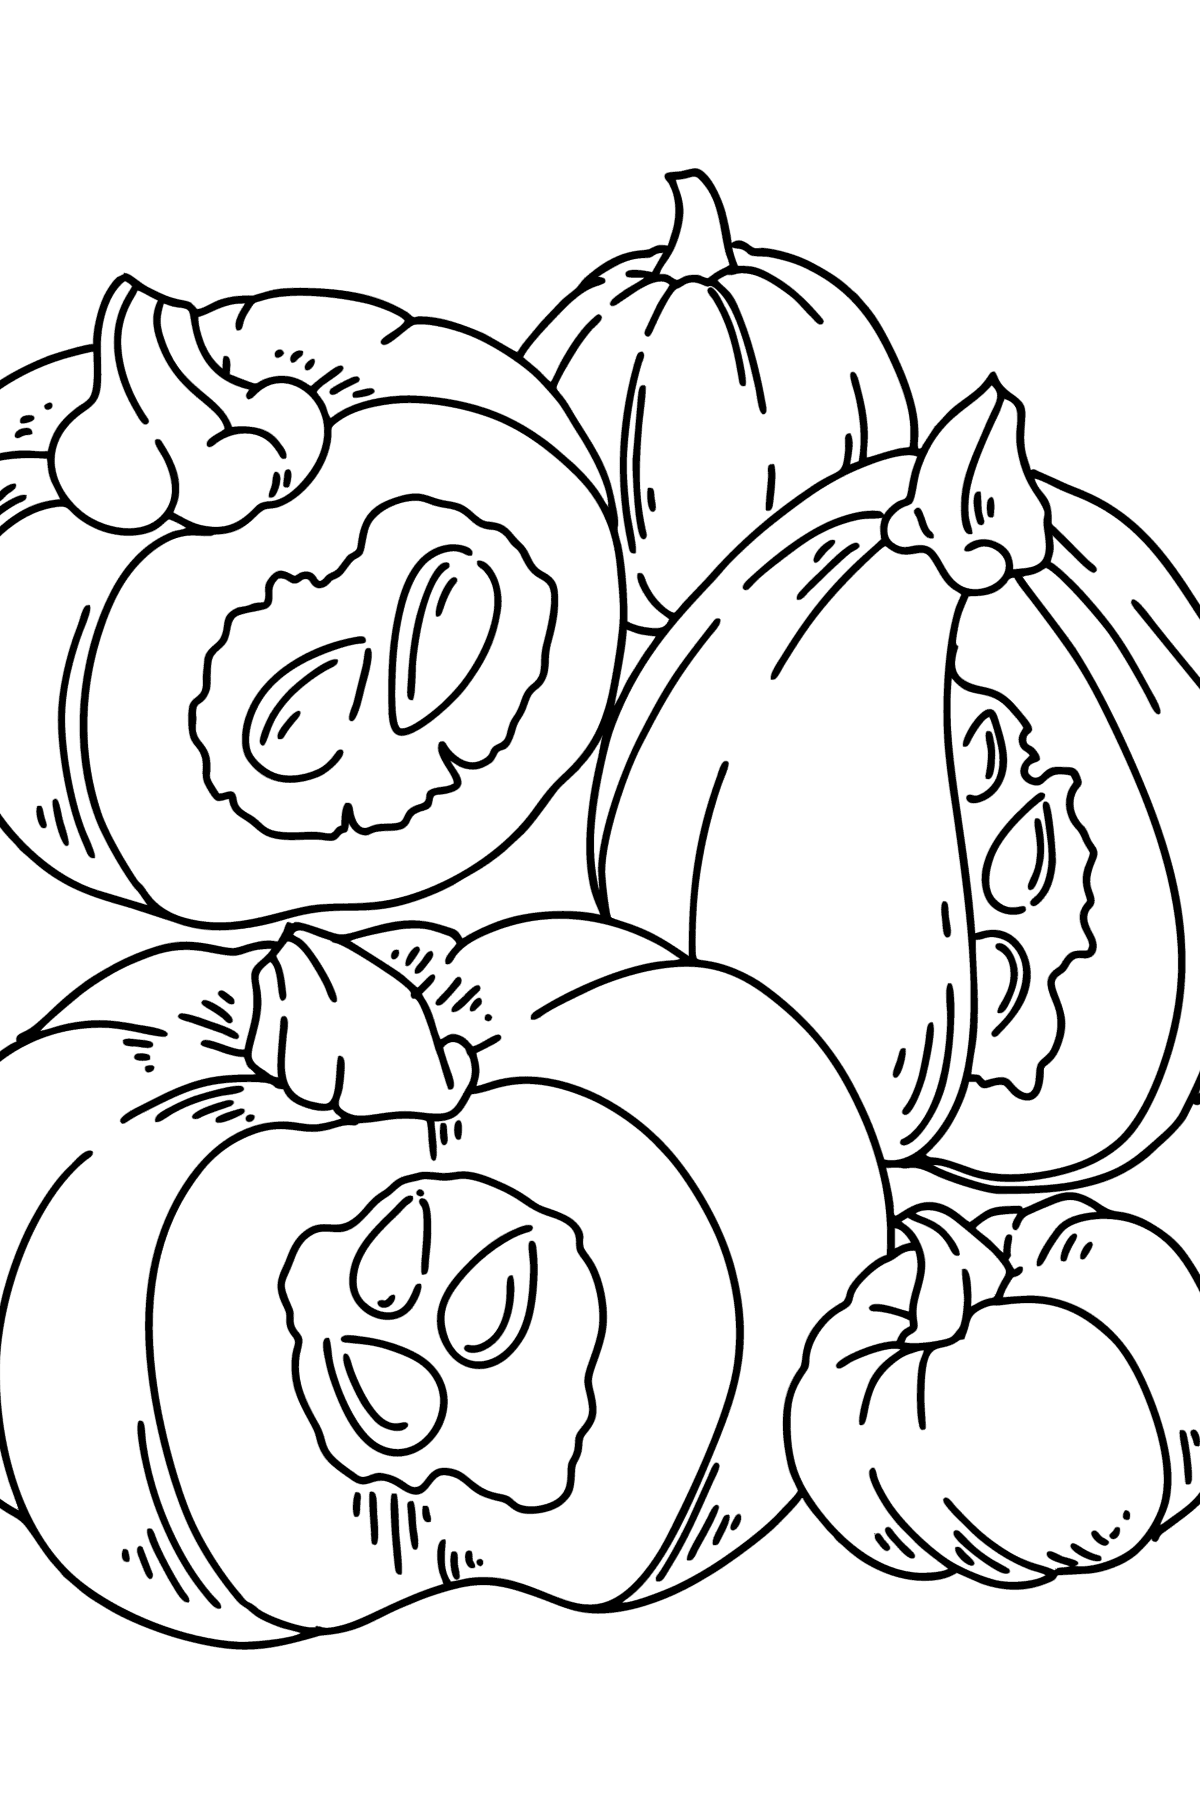 Coloring page Autumn - Pumpkin harvest - Coloring Pages for Kids